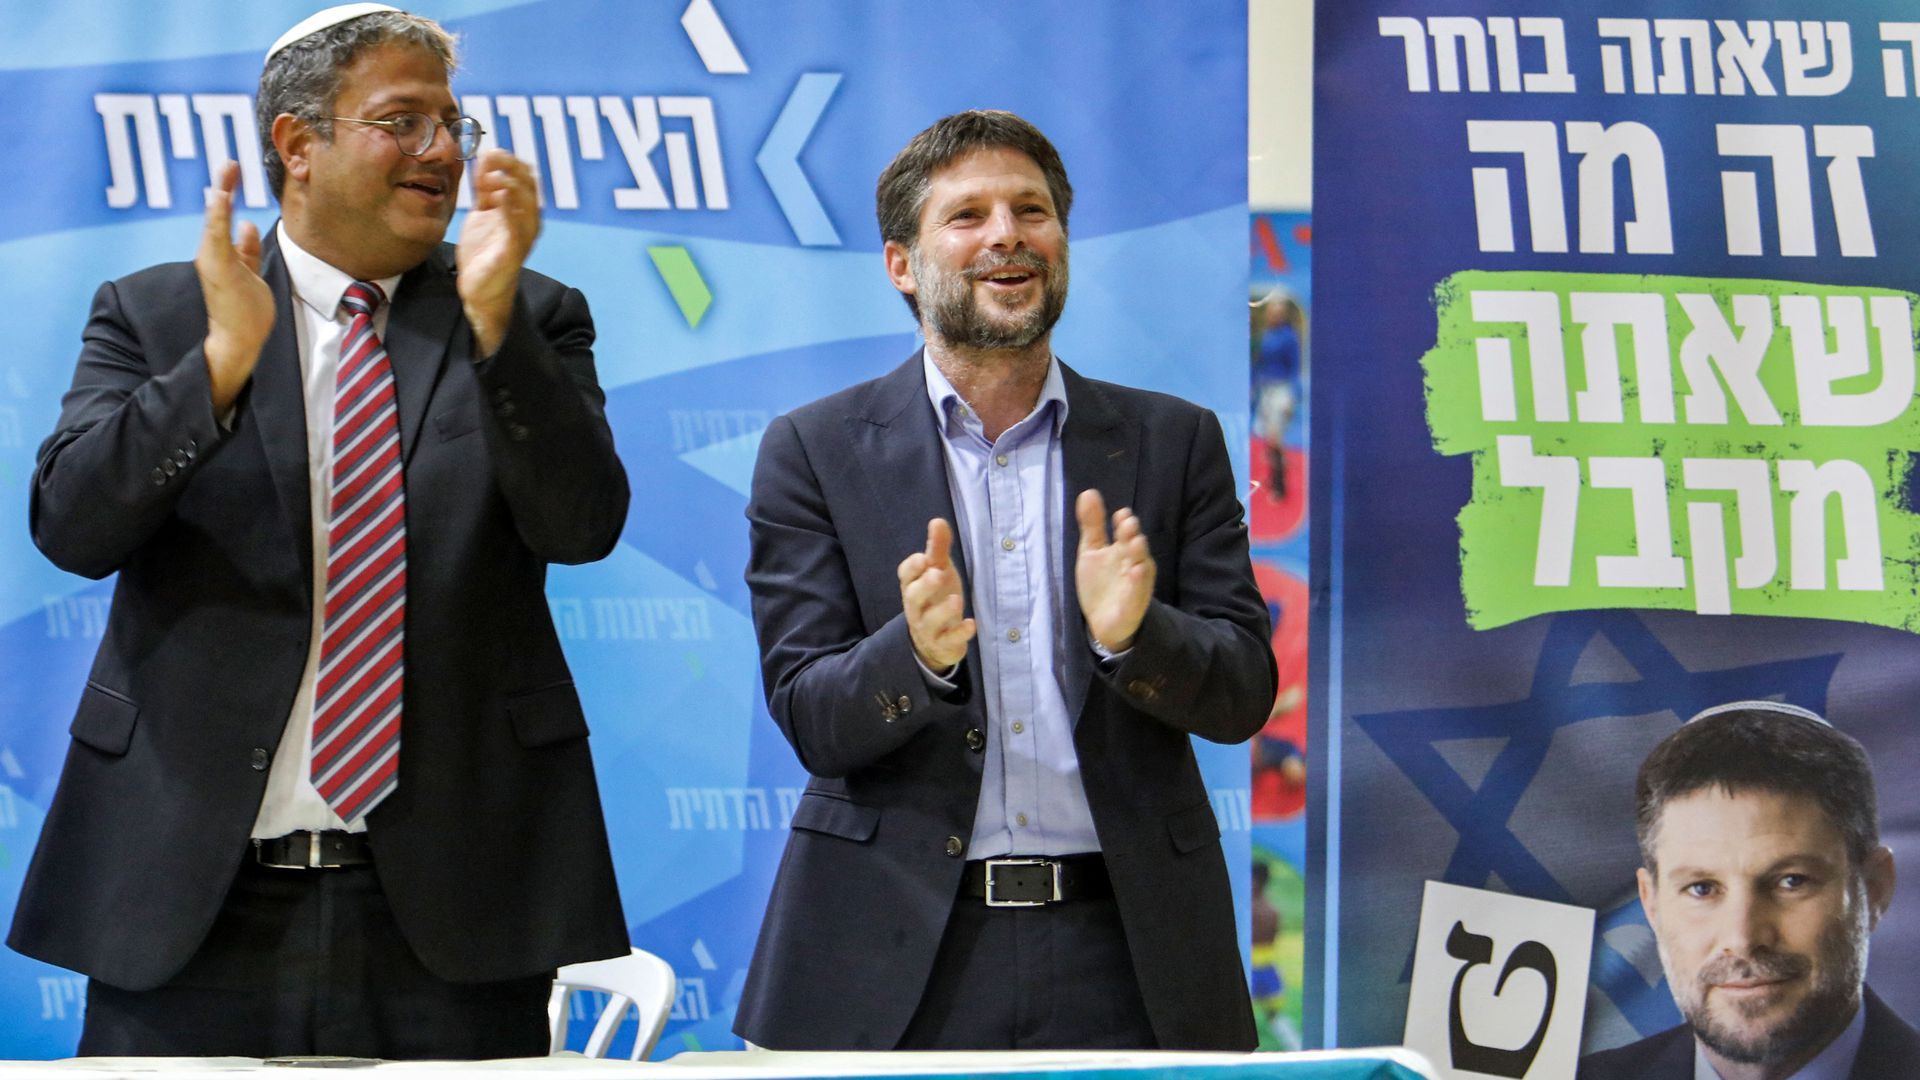 Itamar Ben-Gvir (L), leader of the Jewish Power party, and Bezalel Smotrich (R), leader of the Religious Zionist Party, attend a rally in the Israeli city of Sderot on Oct. 26. 